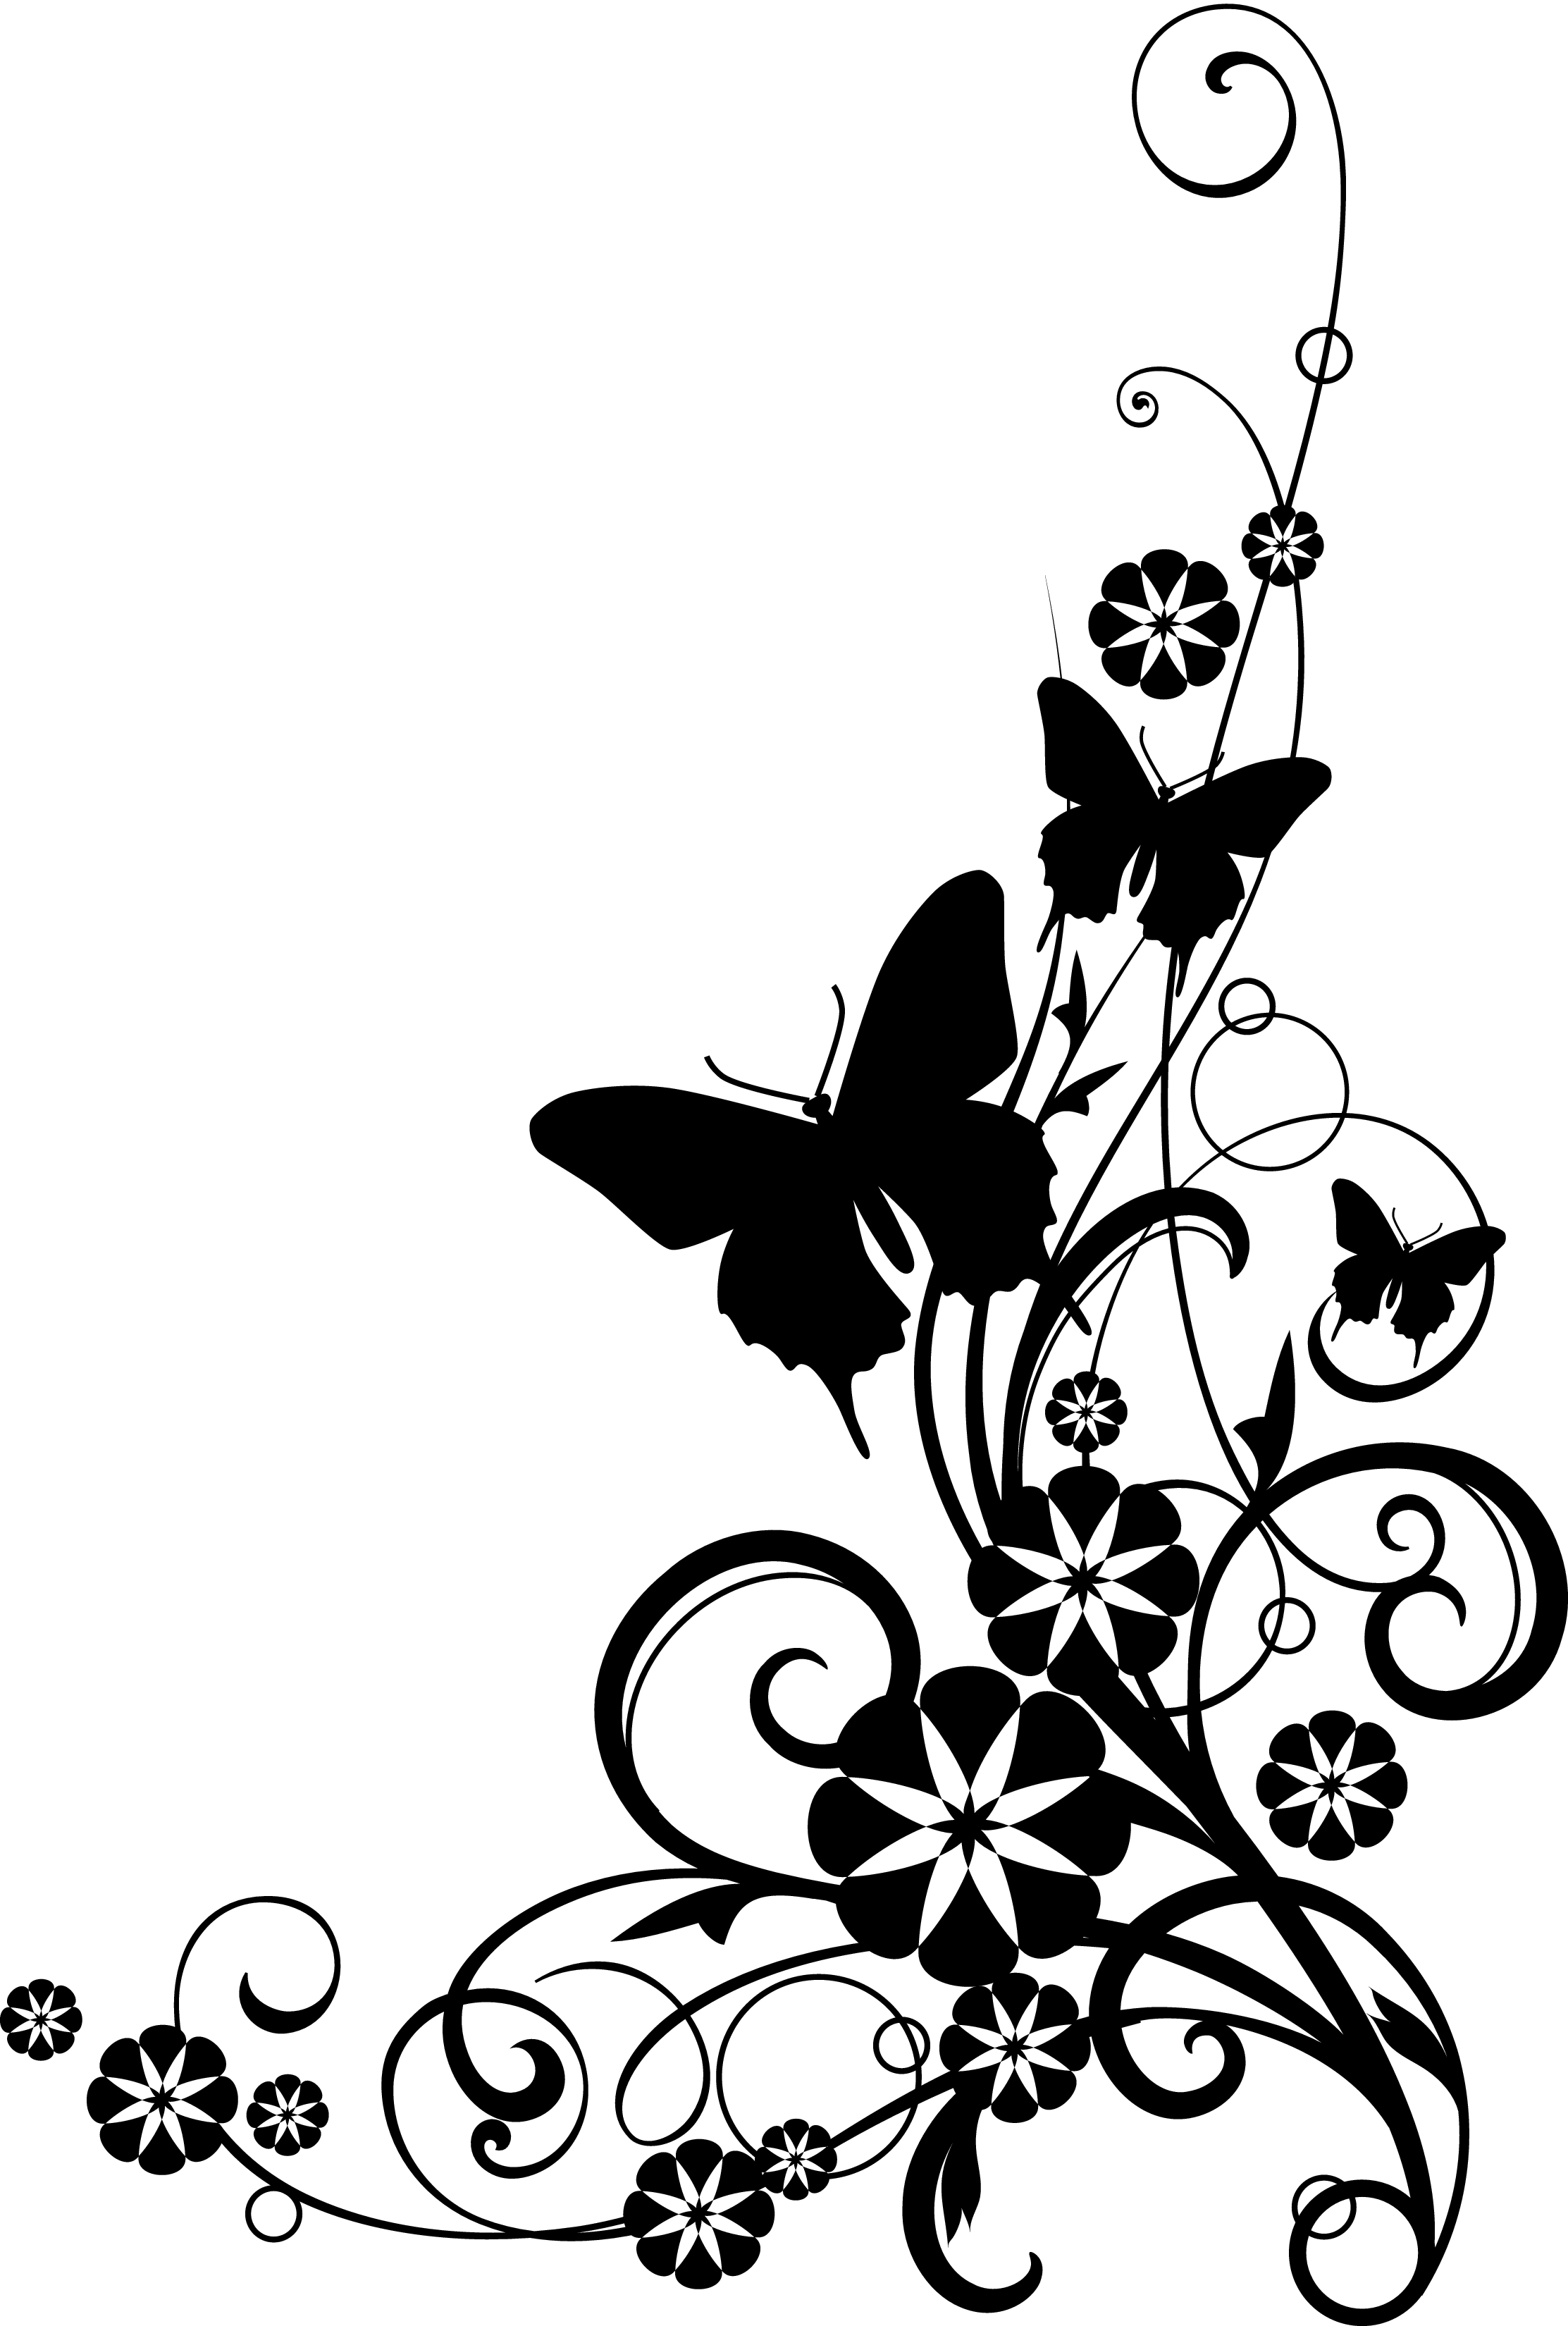 Black and white flower border clipart #41803 - Free Icons and PNG